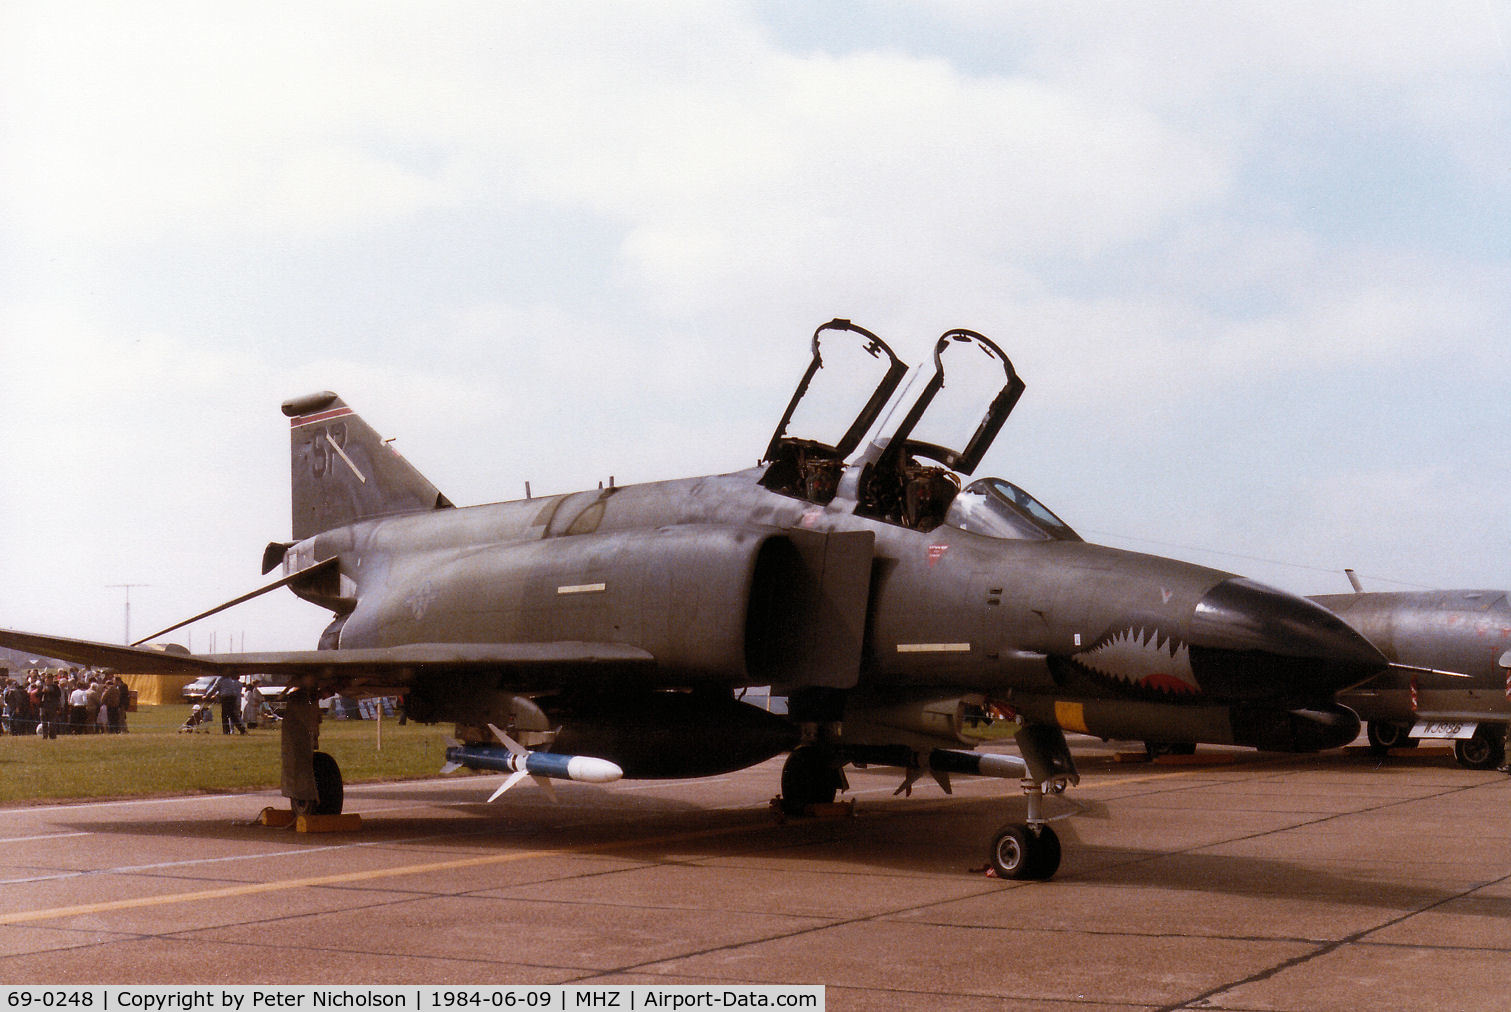 69-0248, 1969 McDonnell Douglas F-4G Phantom II C/N 3773, F-4G Phantom of Spangdahlem's 52nd Tactical Fighter Wing on display at the 1984 RAF Mildenhall Air Fete.